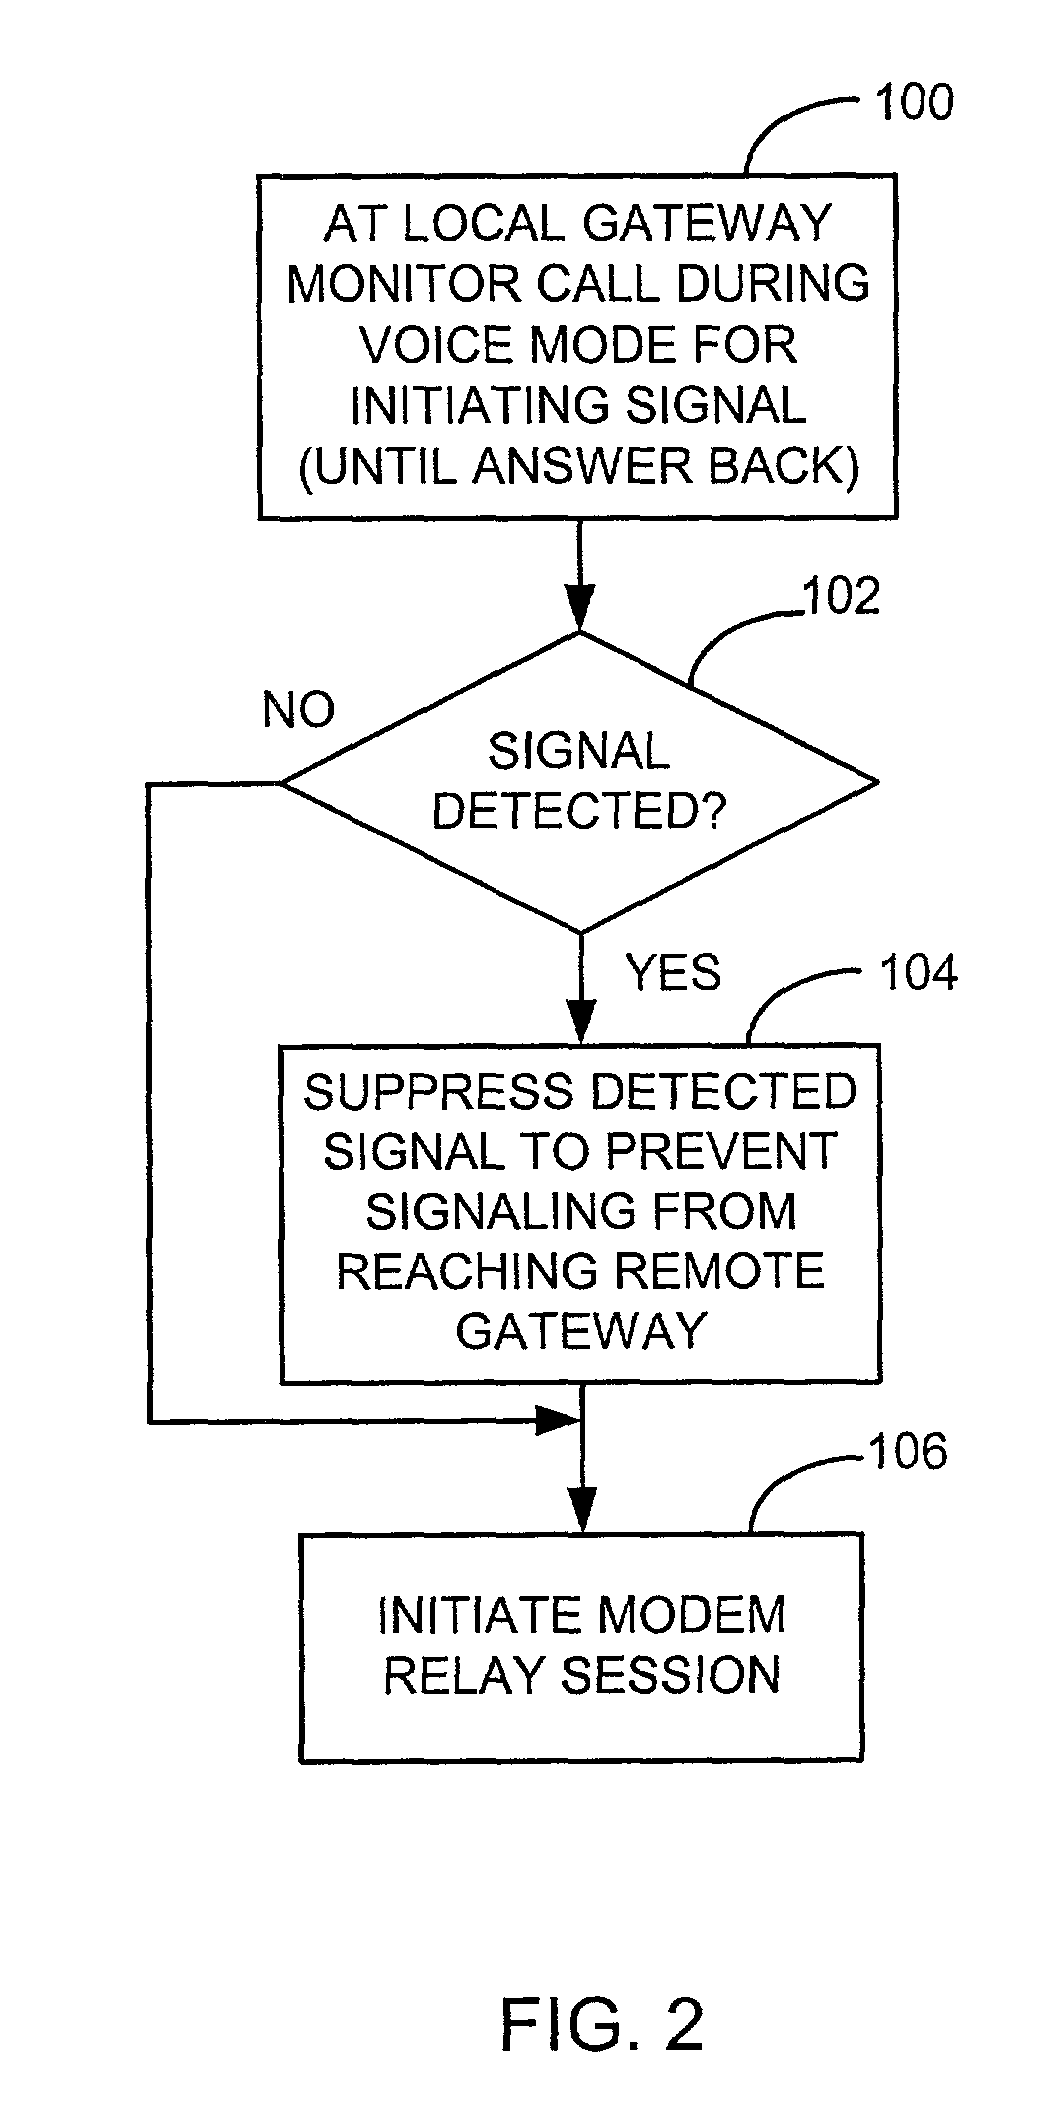 V.8bis suppression method and apparatus for modem relay